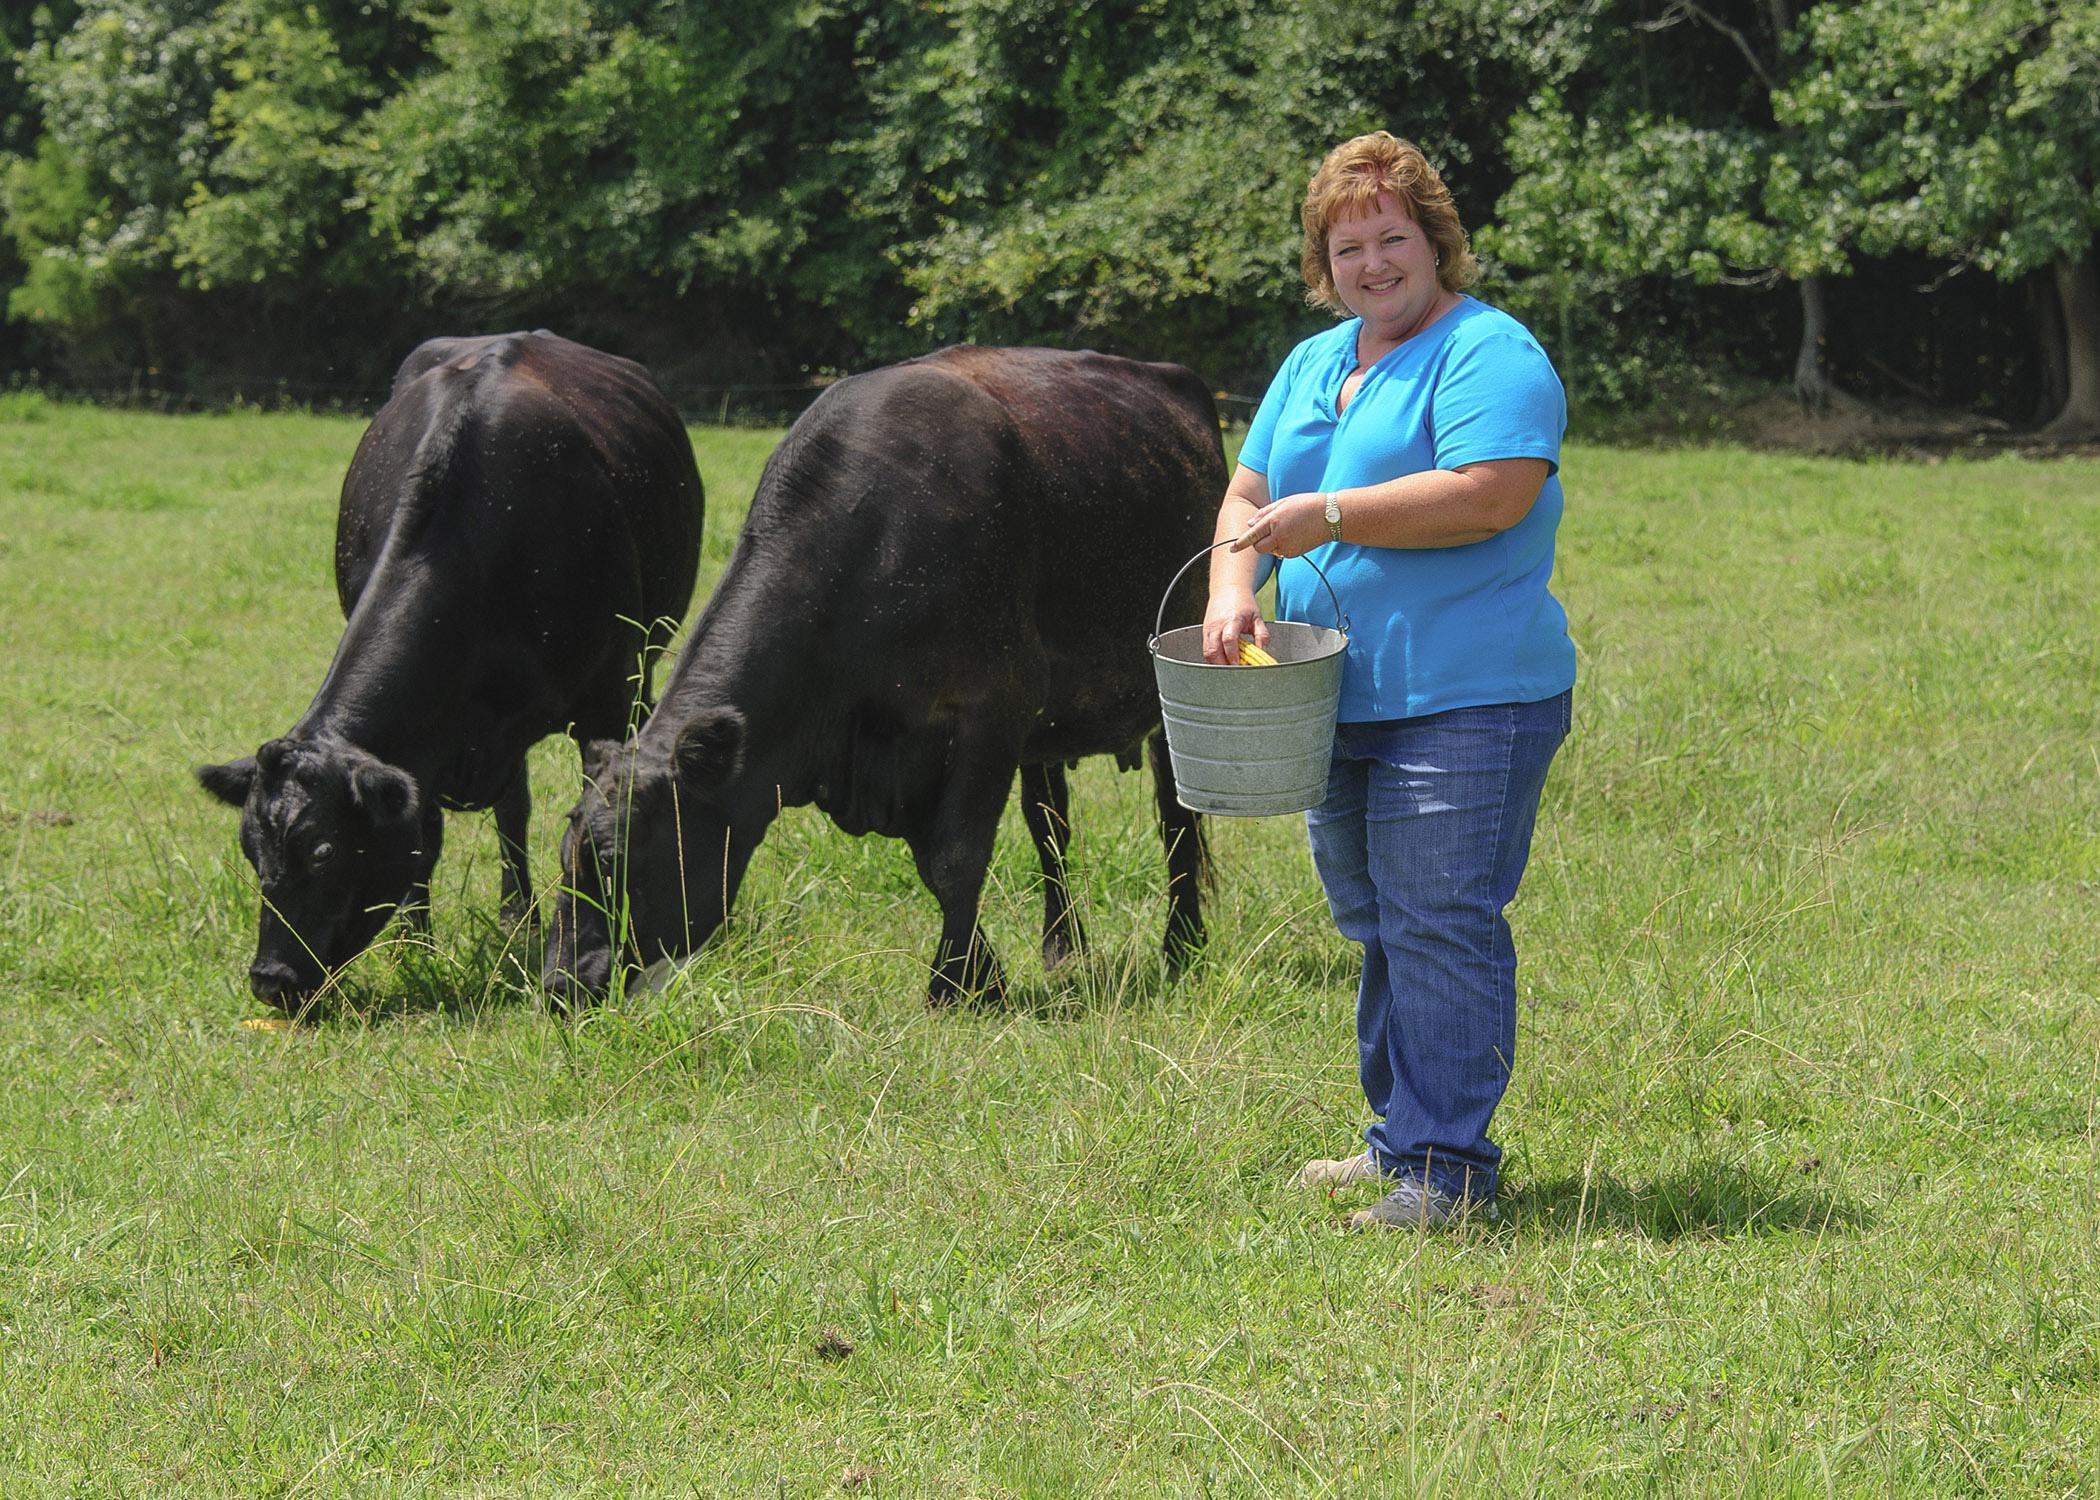 Sandy Coleman Mitchell feeds cattle at her family's farm in Corinth on July 14, 2014. Mitchell strives to educate her community about the importance of agriculture. (Photo by MSU Ag Communications/Kevin Hudson)